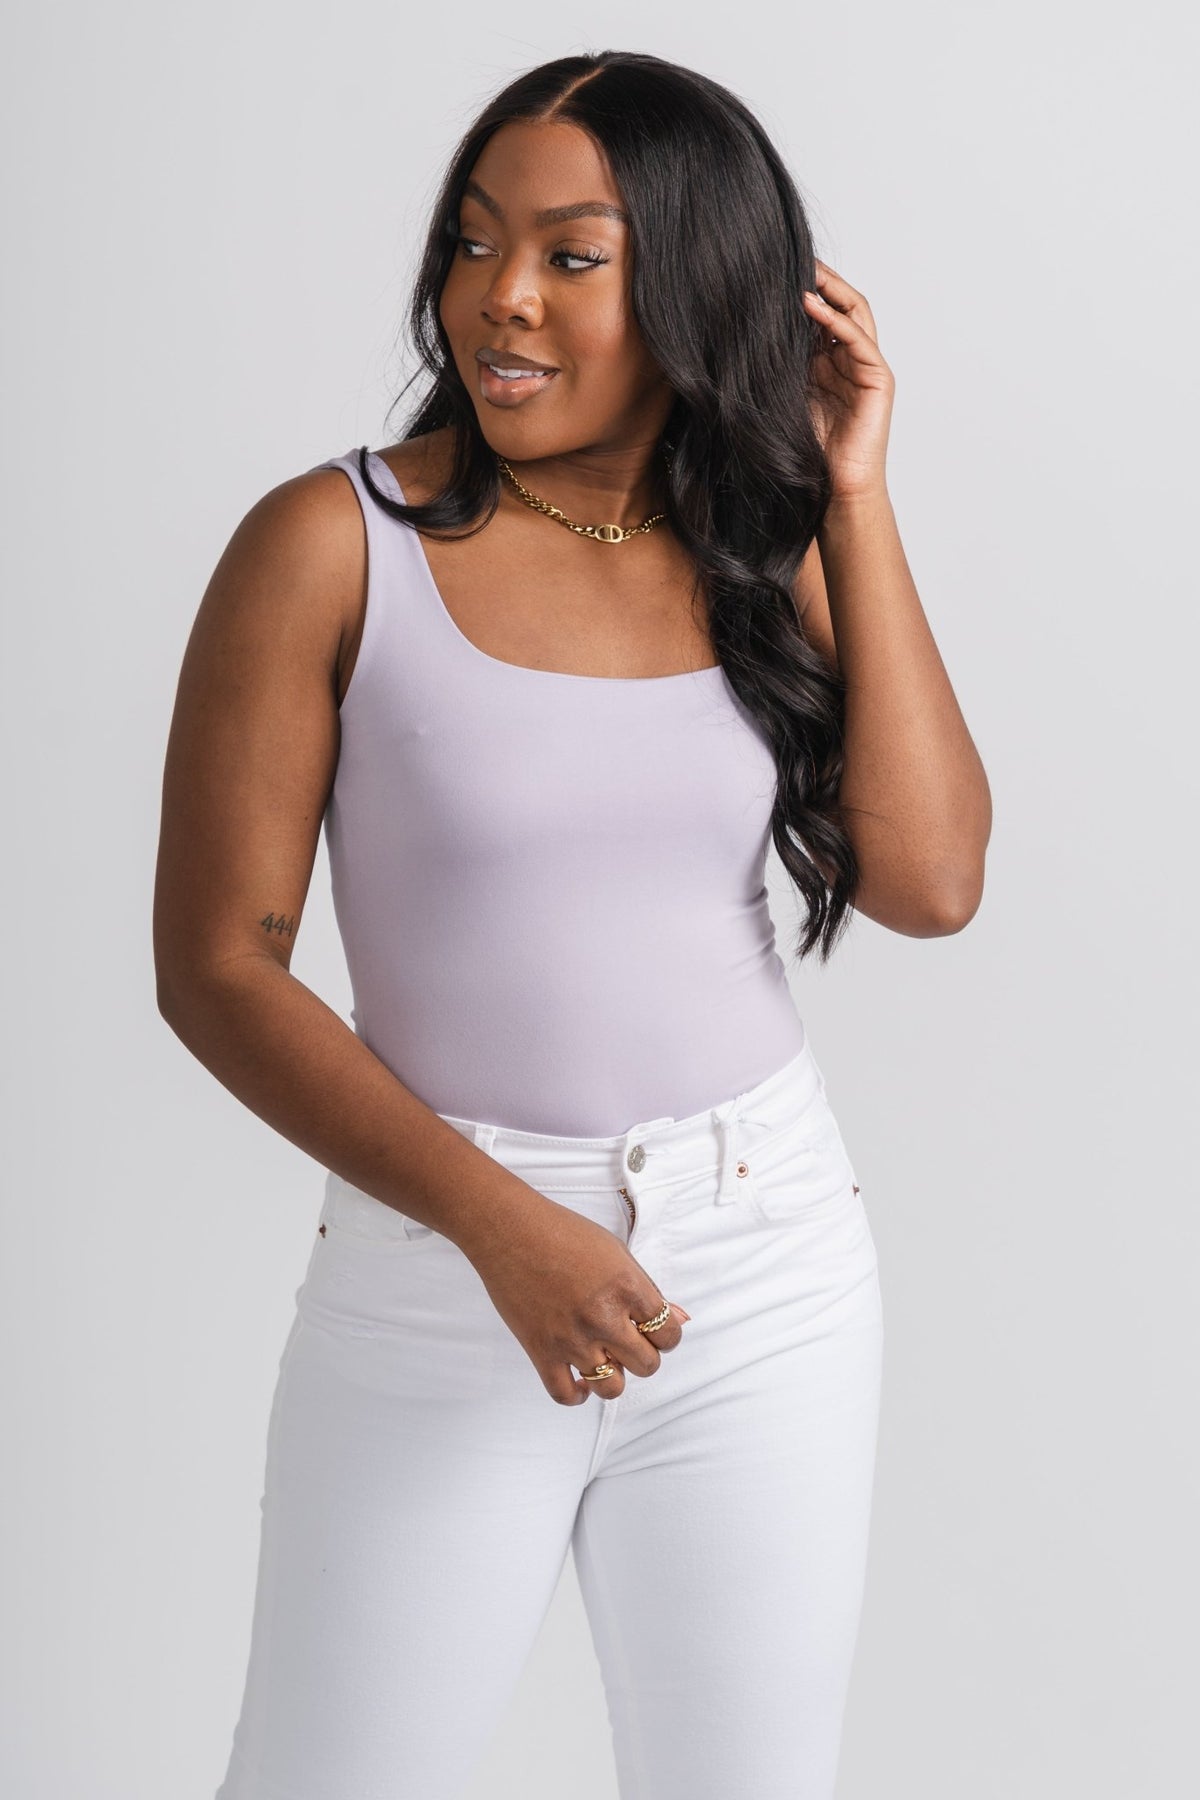 Square neck bodysuit lavender - Stylish bodysuit - Cute Easter Outfits at Lush Fashion Lounge Boutique in Oklahoma